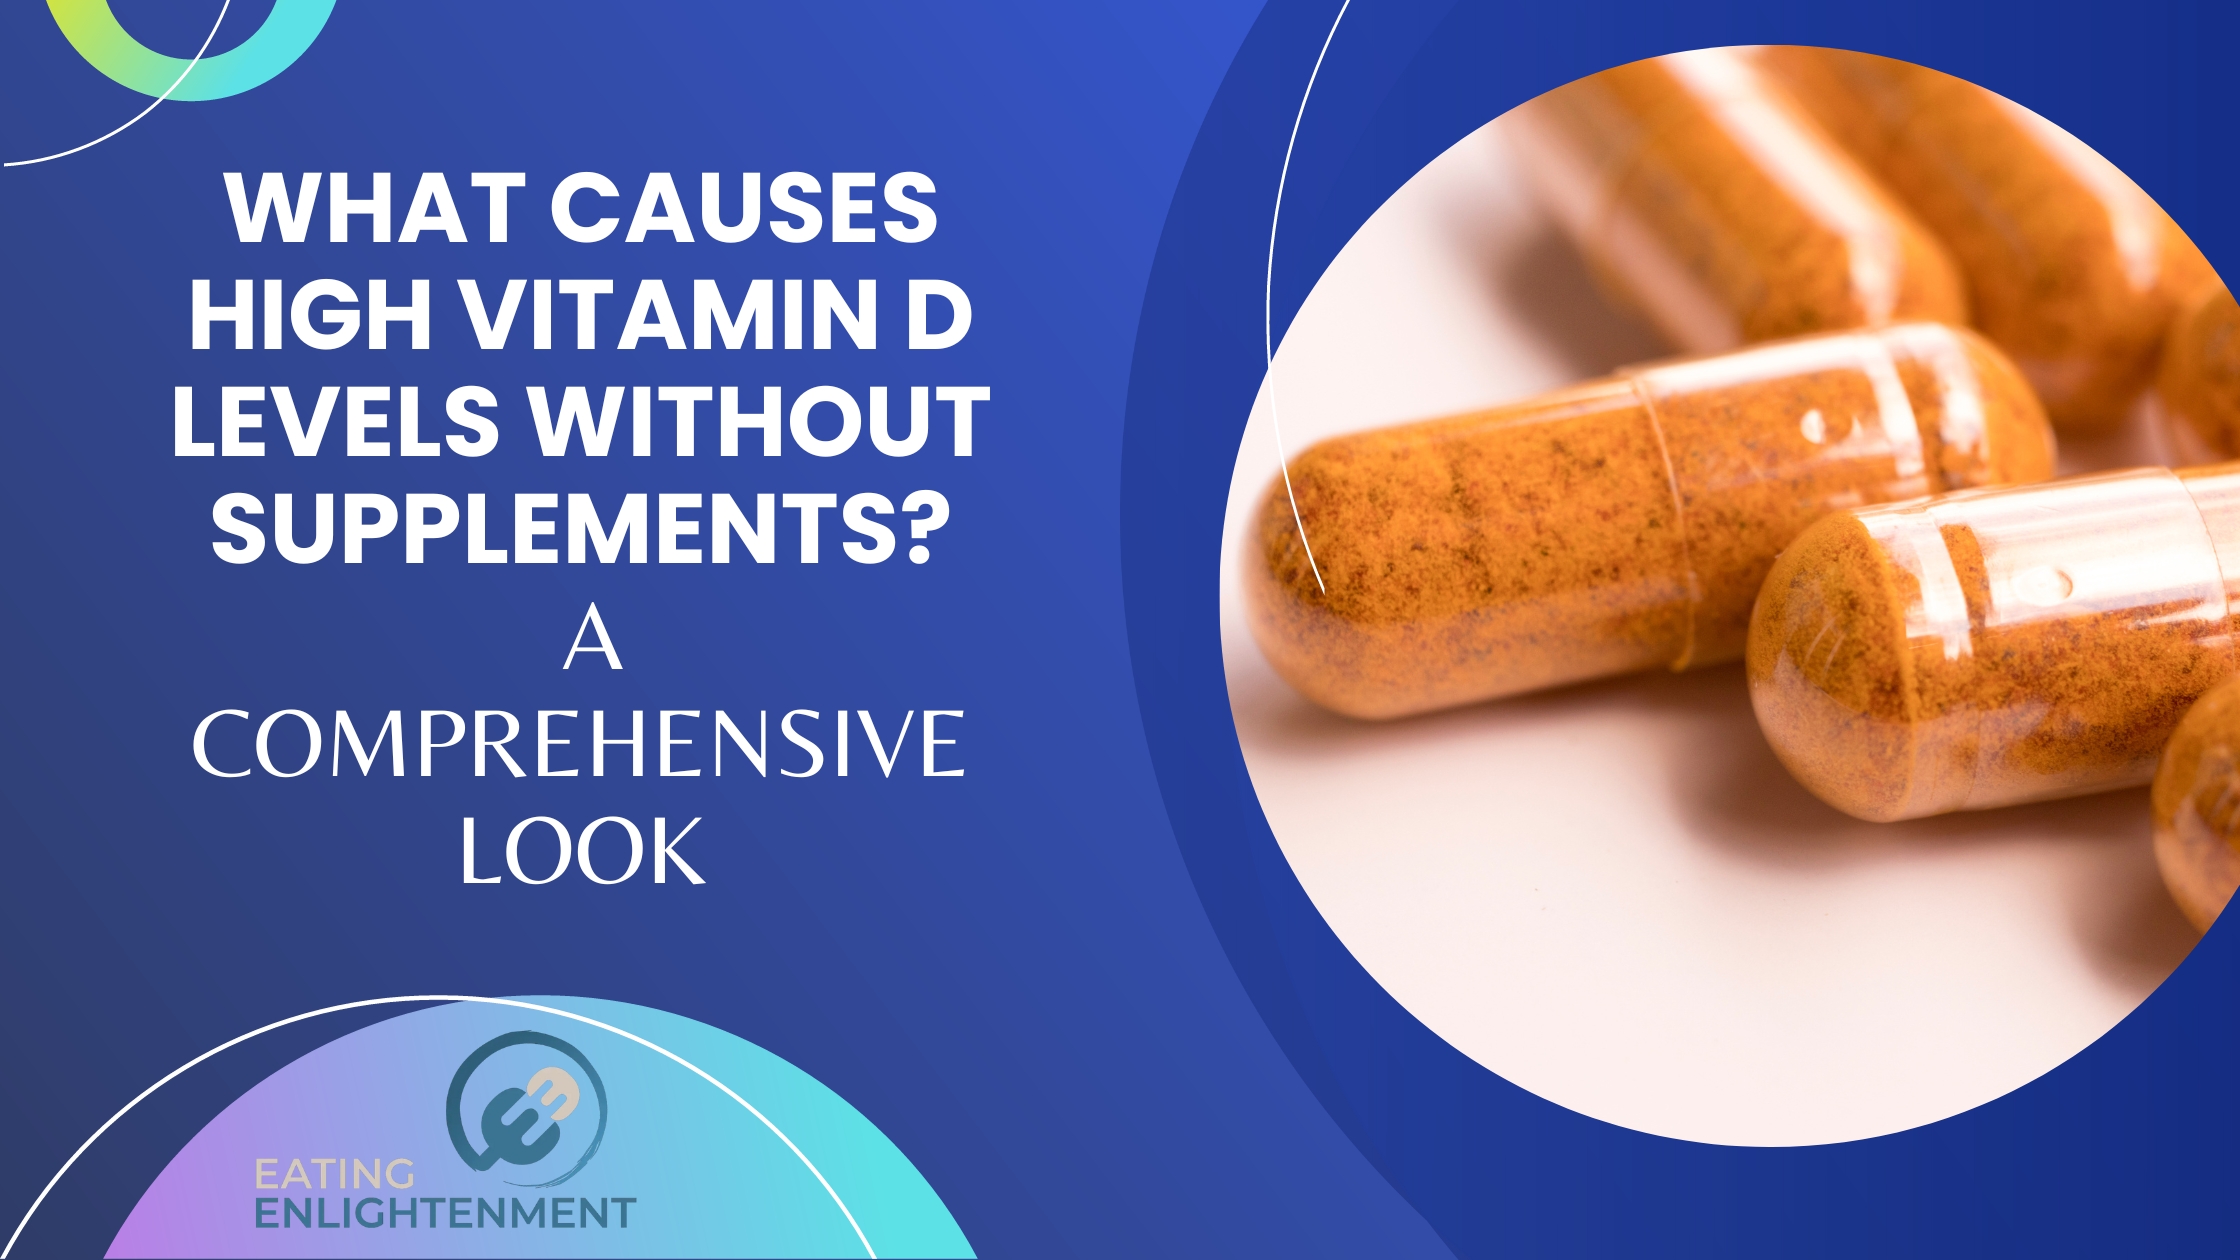 What Causes High Vitamin D Levels Without Supplements? A Comprehensive Look